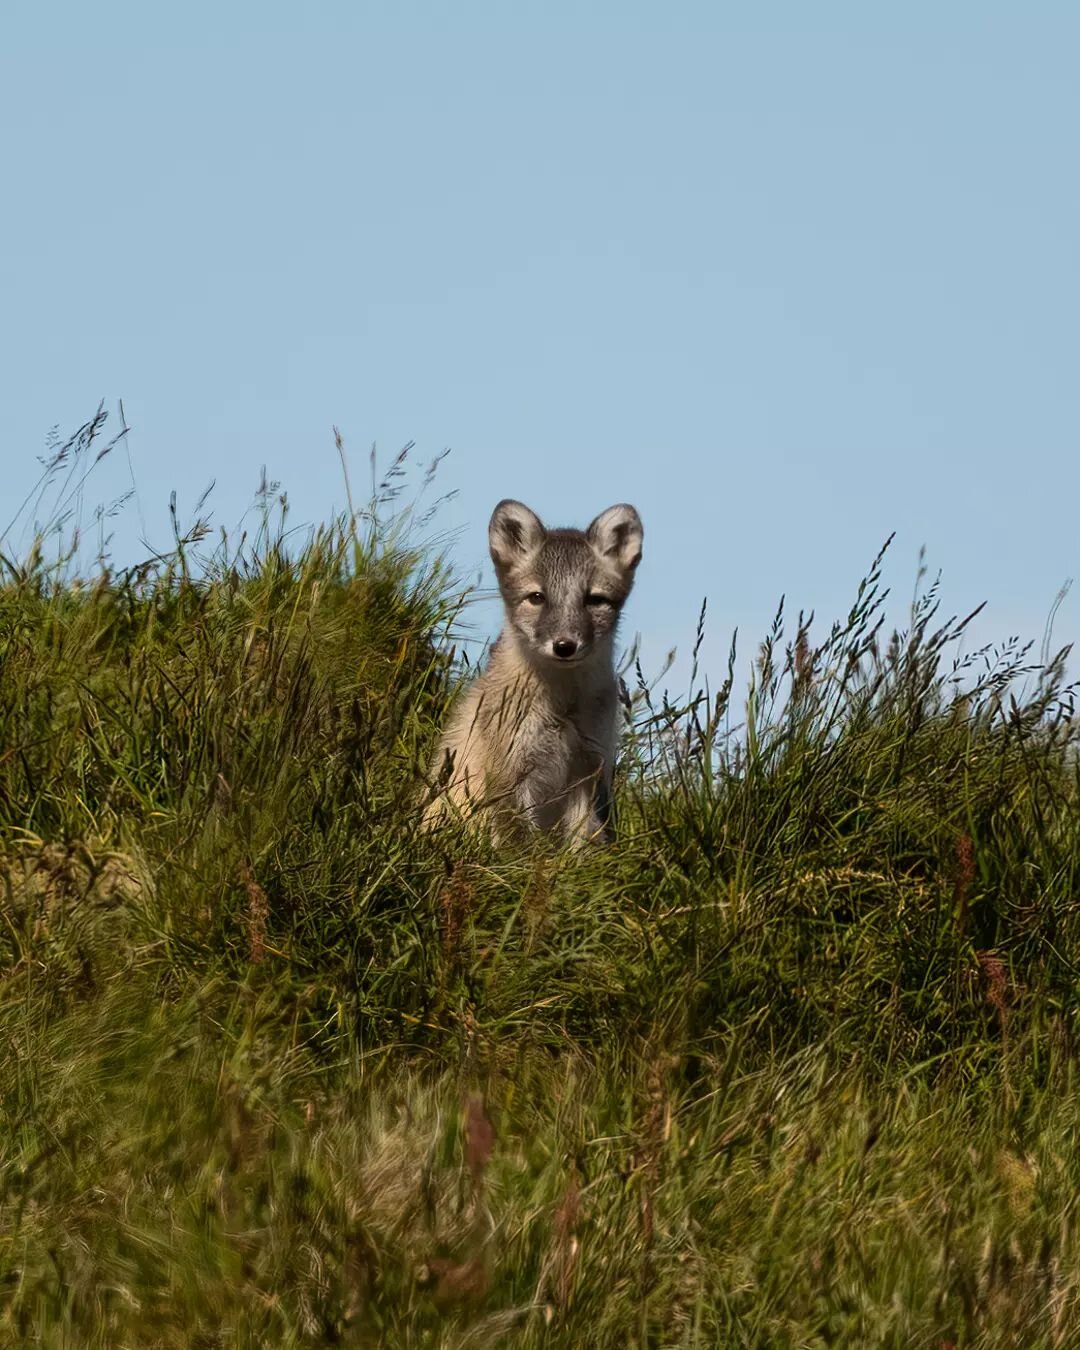 Arctic fox in Norway! 

During my holiday in Norway we did a dayhike in the Hardangervidda national park. I really did not expect to see an arctic fox during this small hike! Arctic foxes are pretty rare in mainland Norway. But luckily, through conse